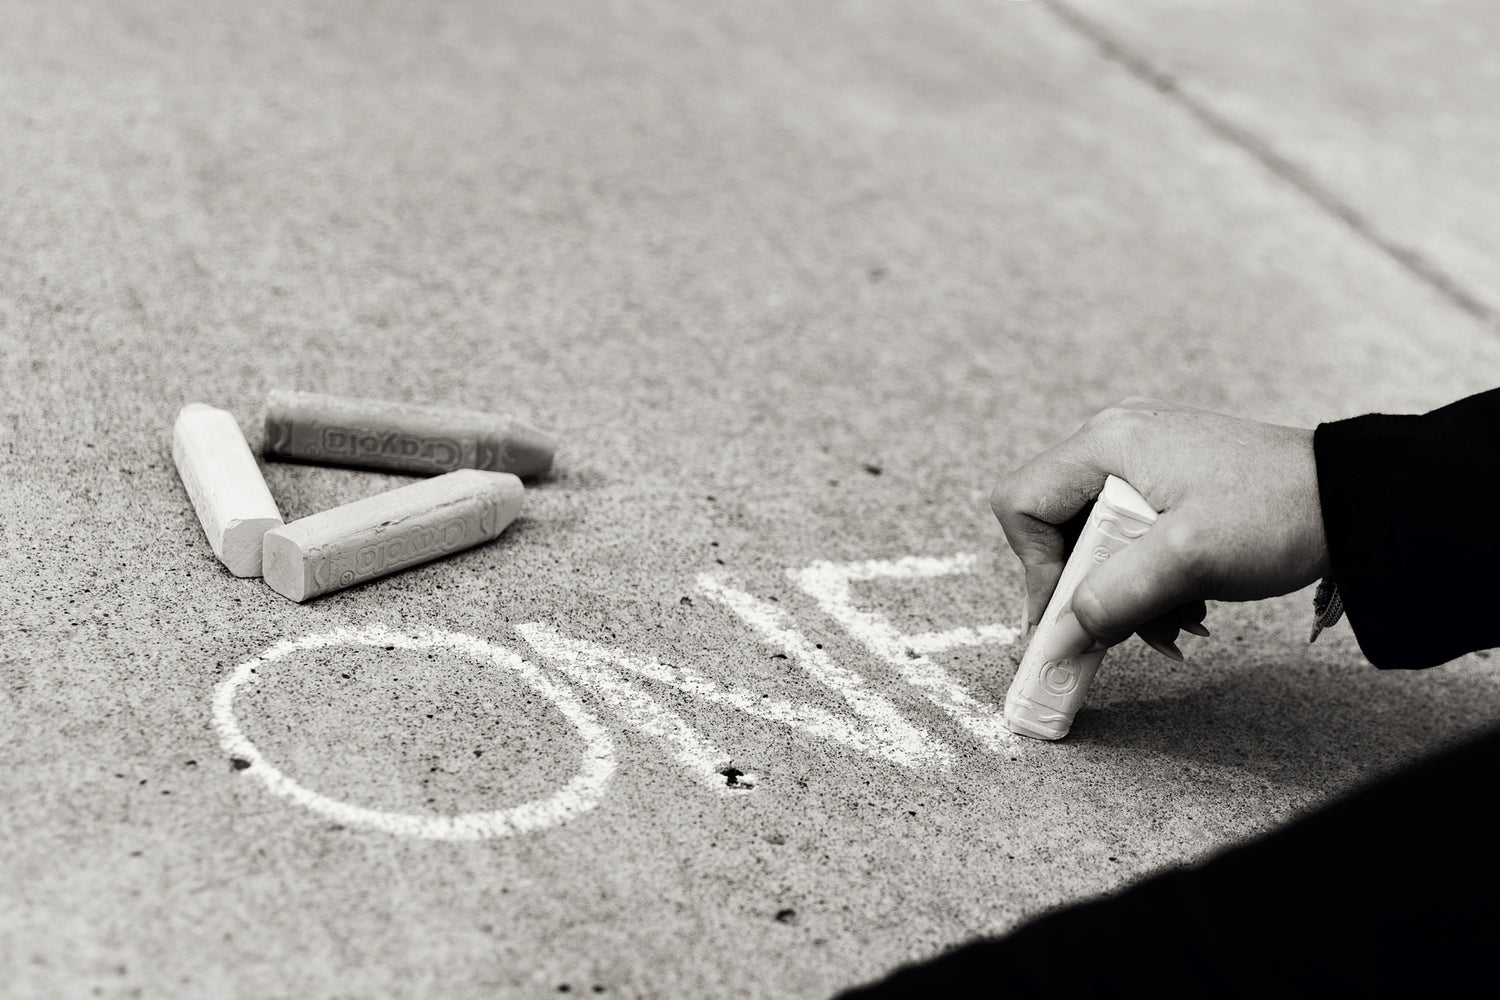 The ONE Book - writing 'one' in chalk